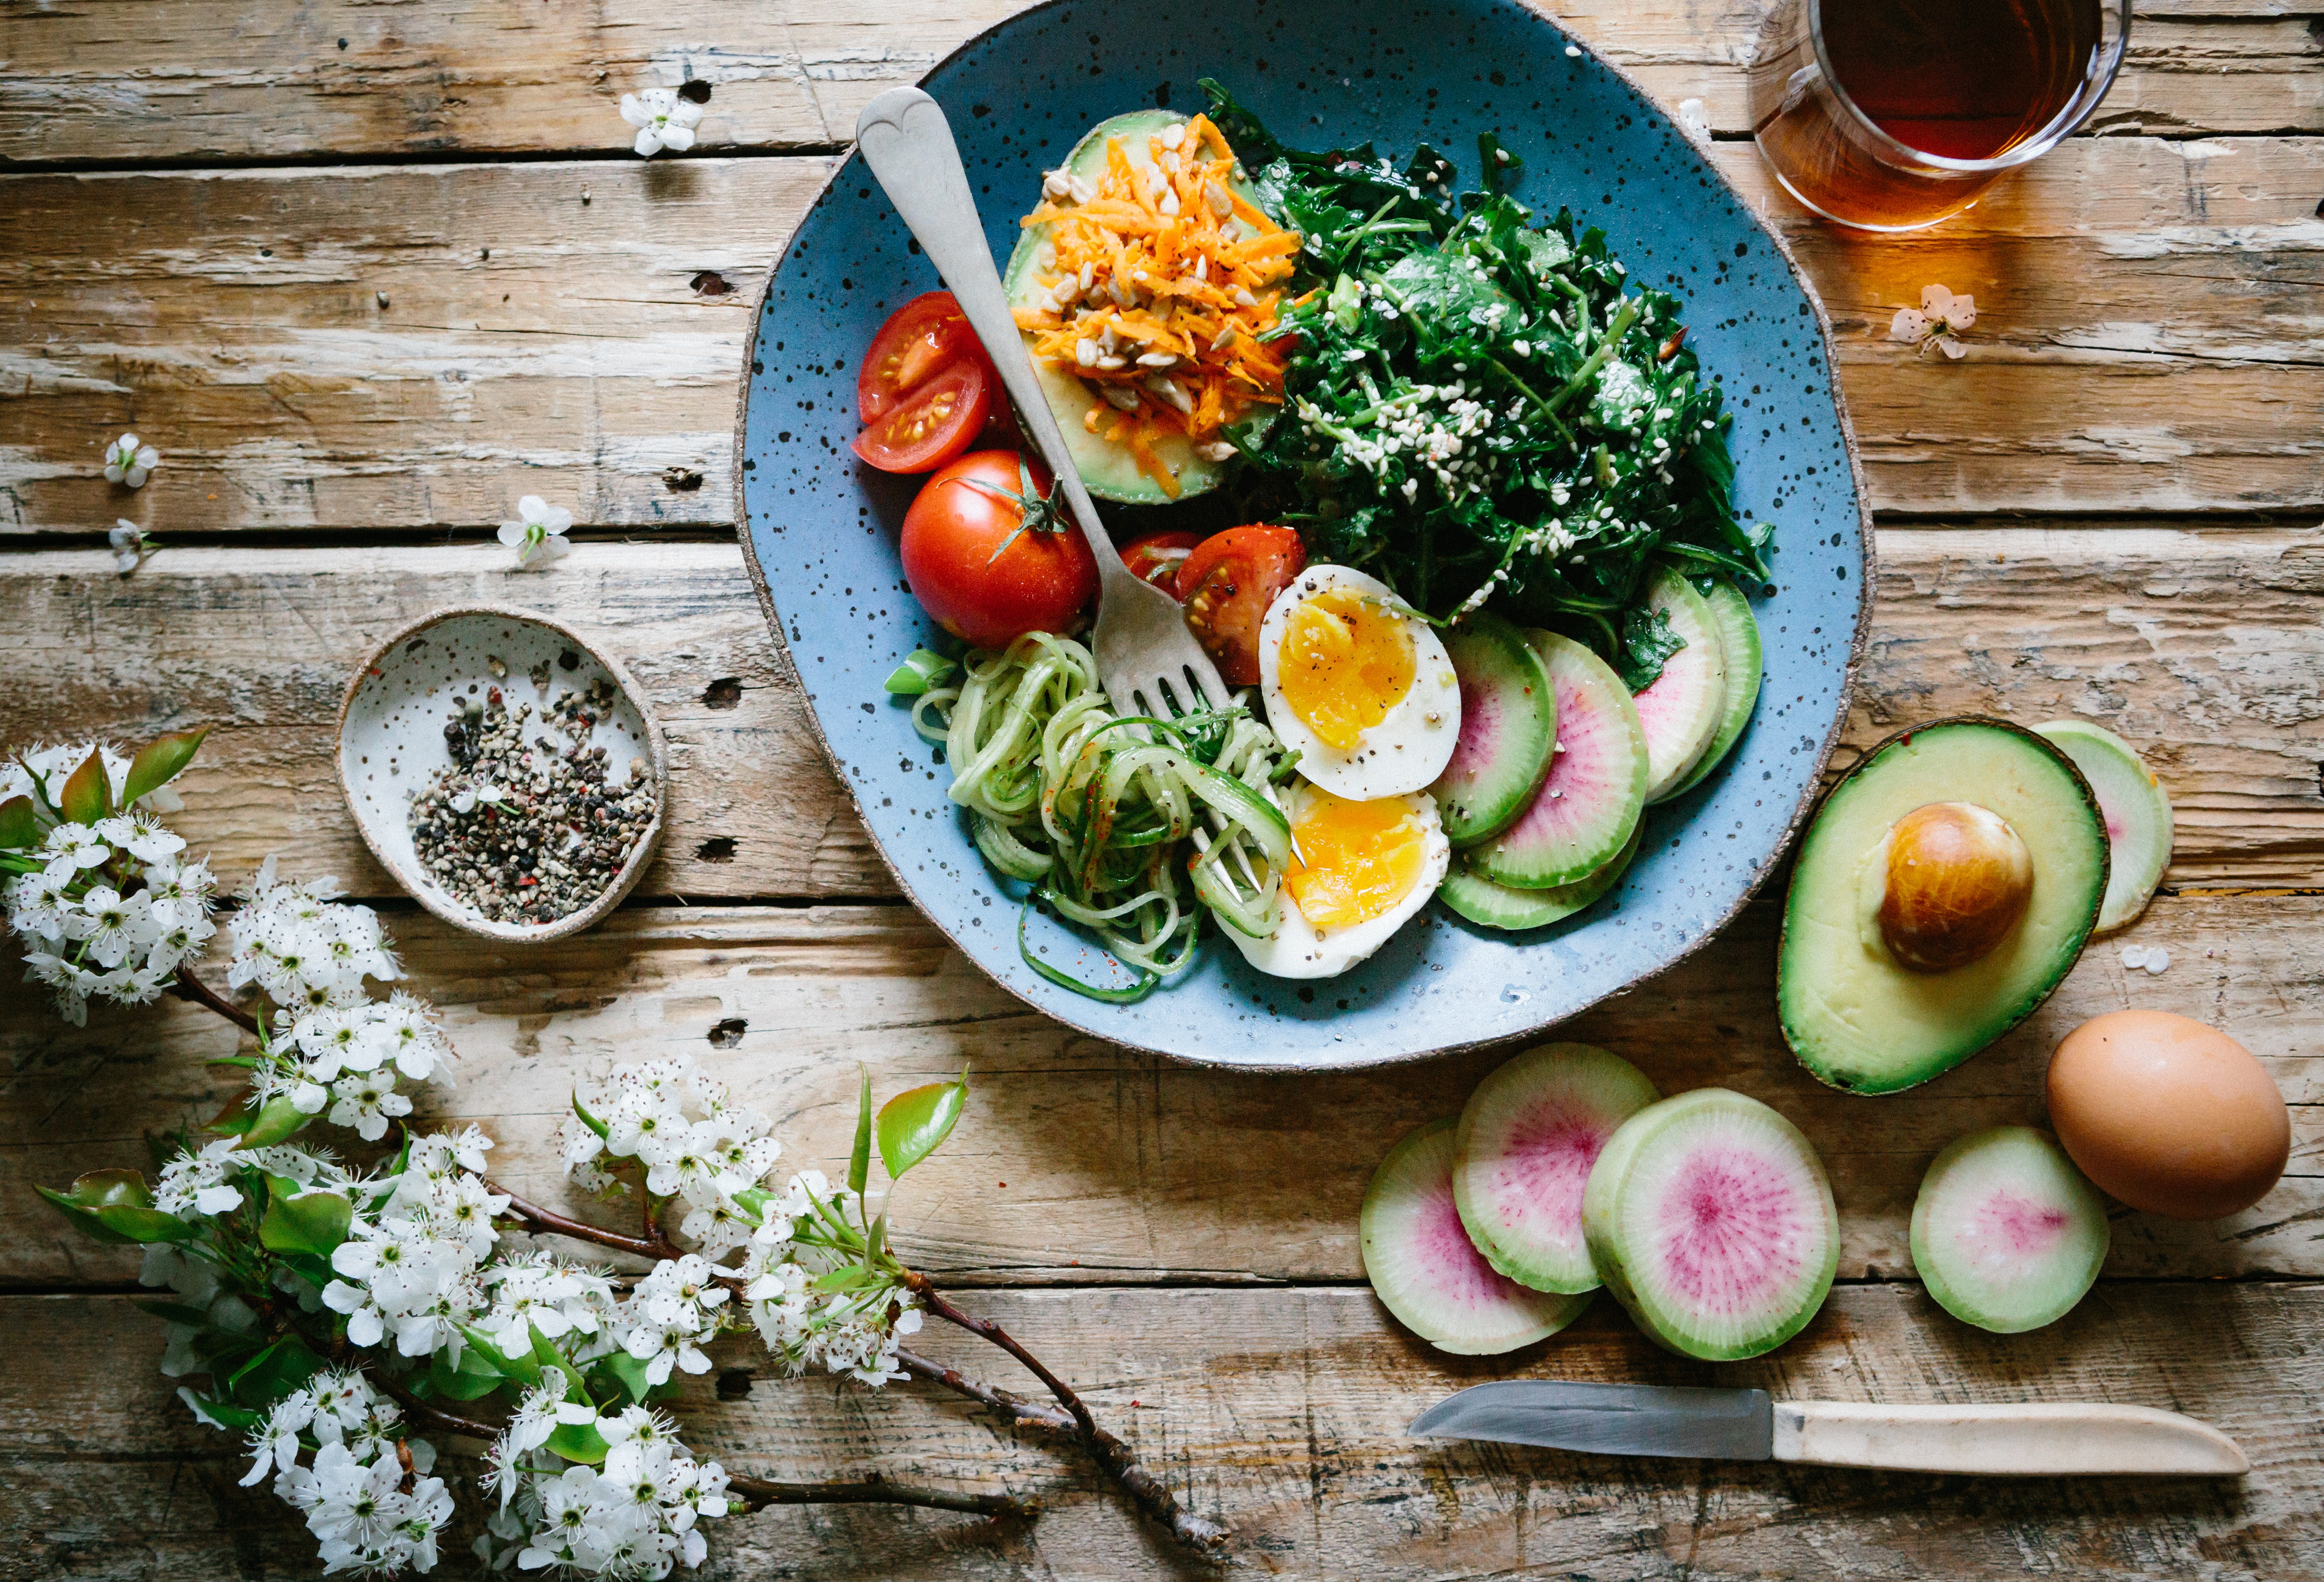 Alt: a salad bowl with healthy foods, surrounded by flowers and tableware. Image courtesy of Unsplash, by Brooke Lark.